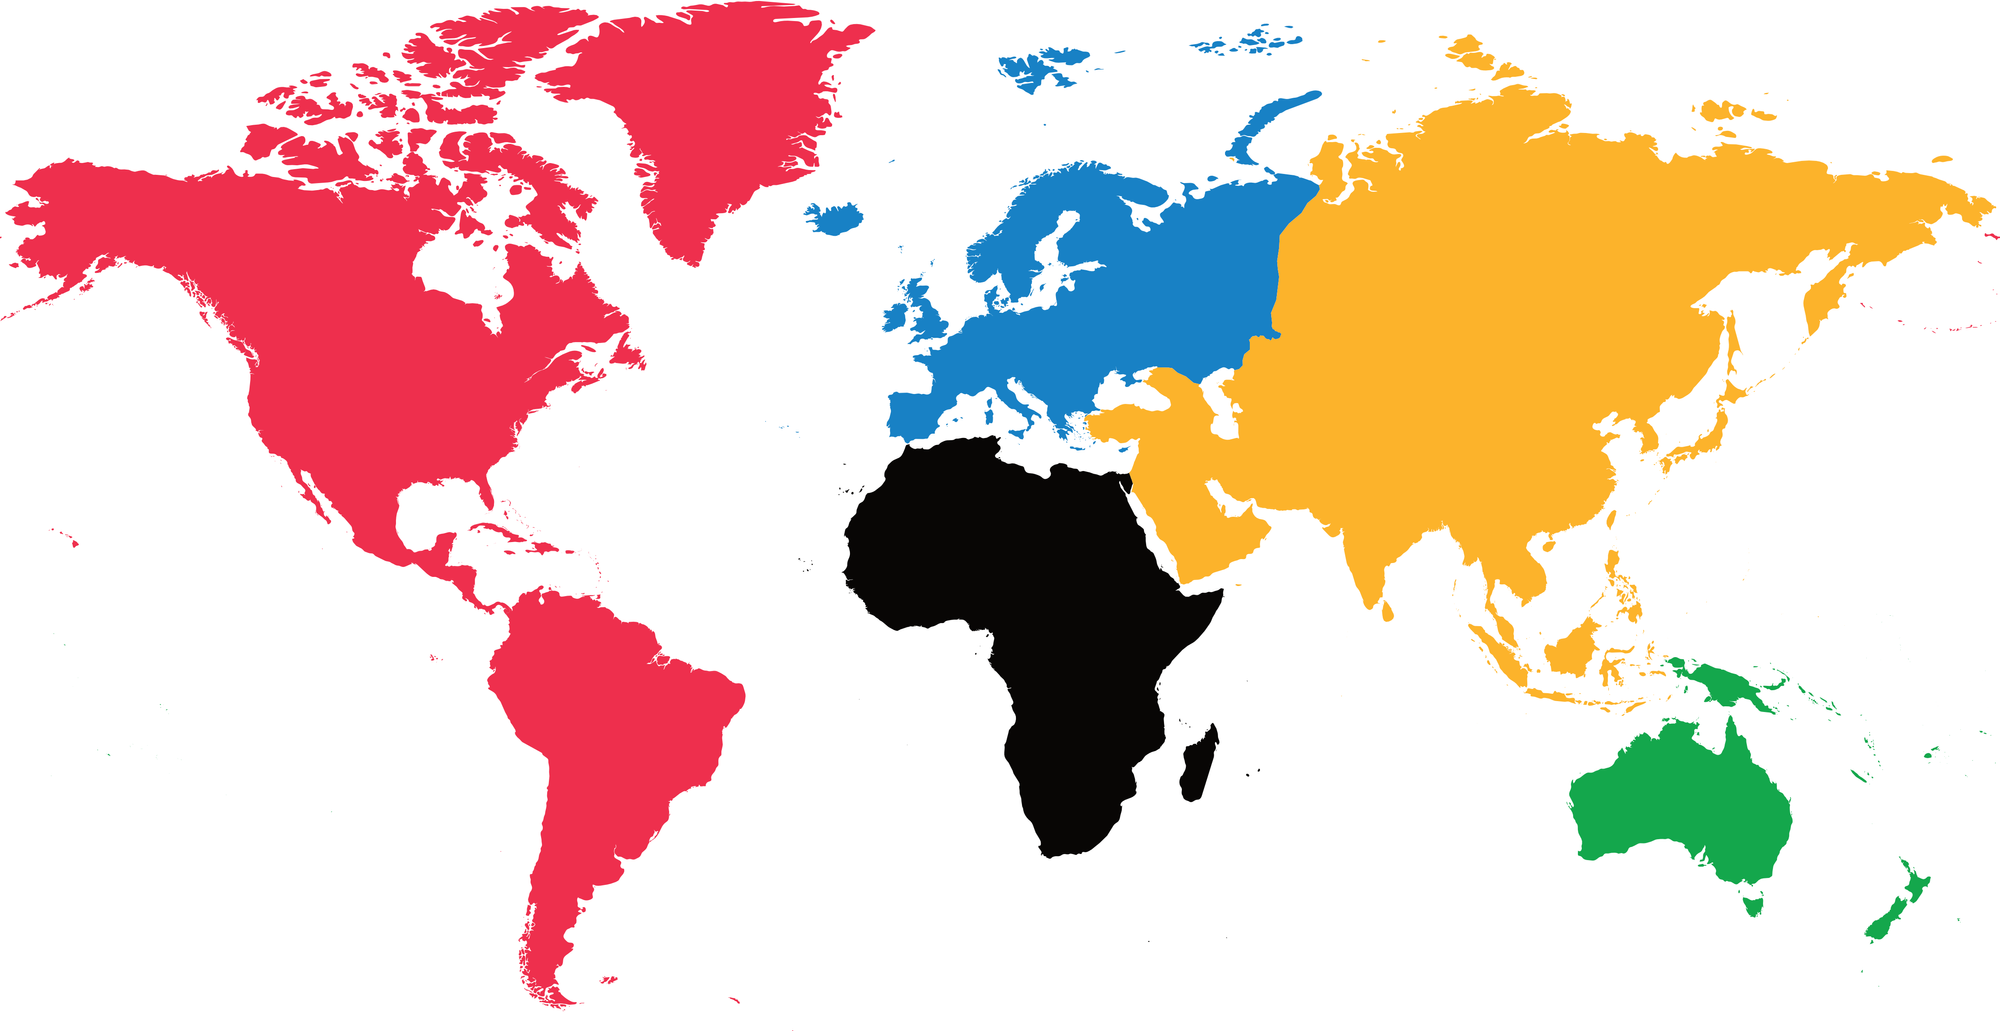 Map of the World with each continent as defined by the Olympic Committee colored to match the Olympuc Charter.     Pan America is red, Europe is blue, Asia is yellow, Africa is black and Oceania green.